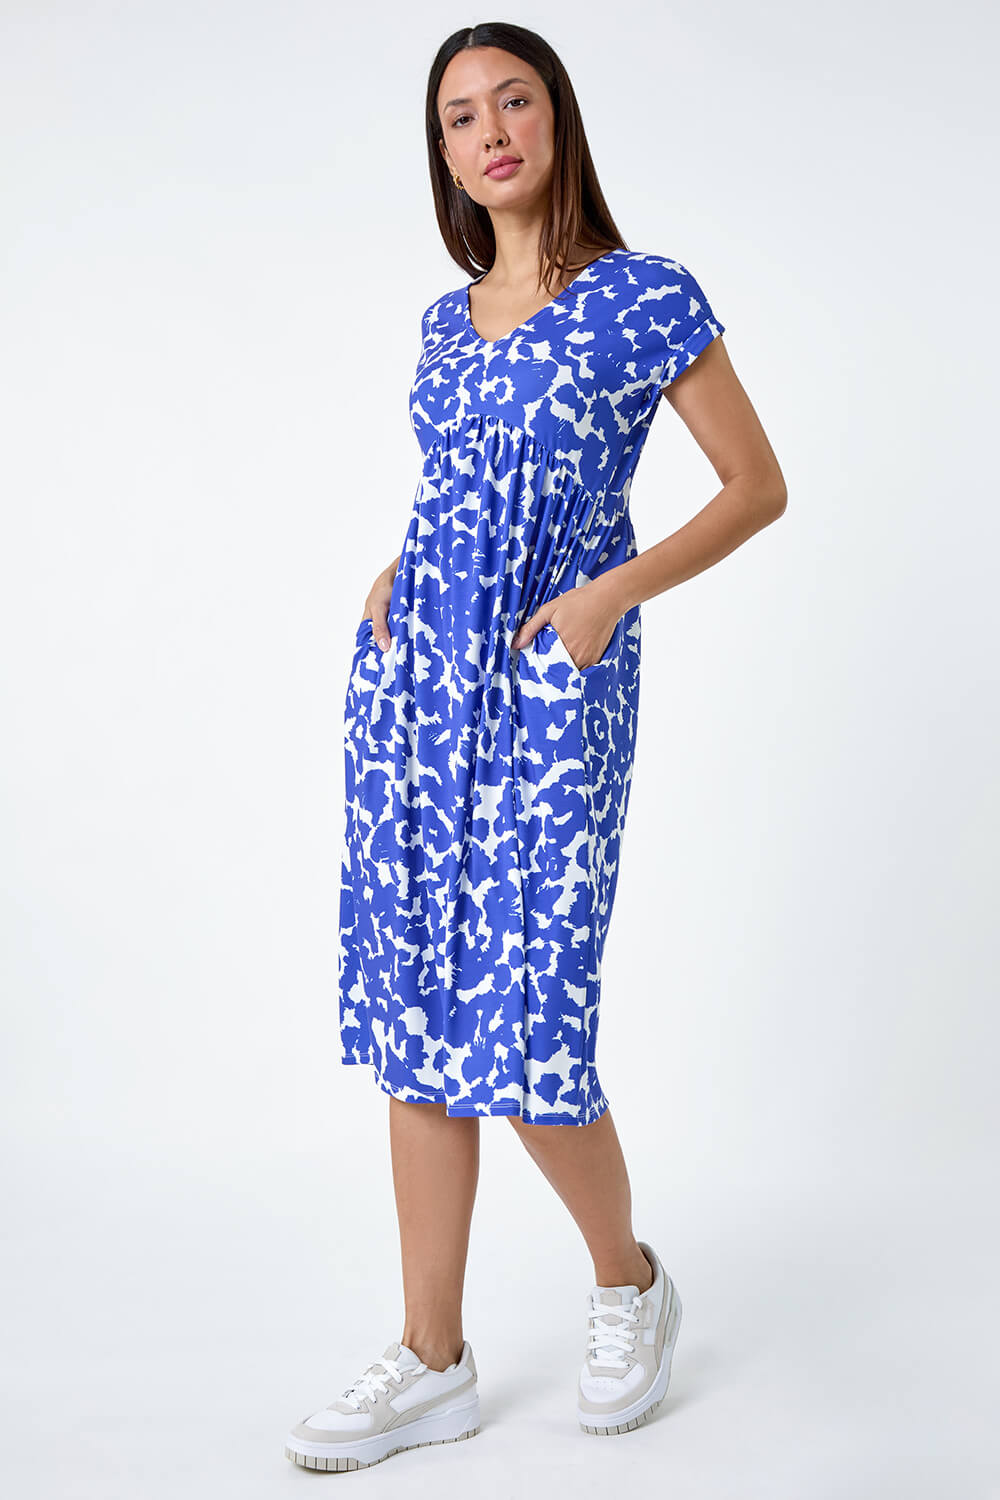 Blue Abstract Print Stretch Pocket T-Shirt Dress, Image 2 of 5